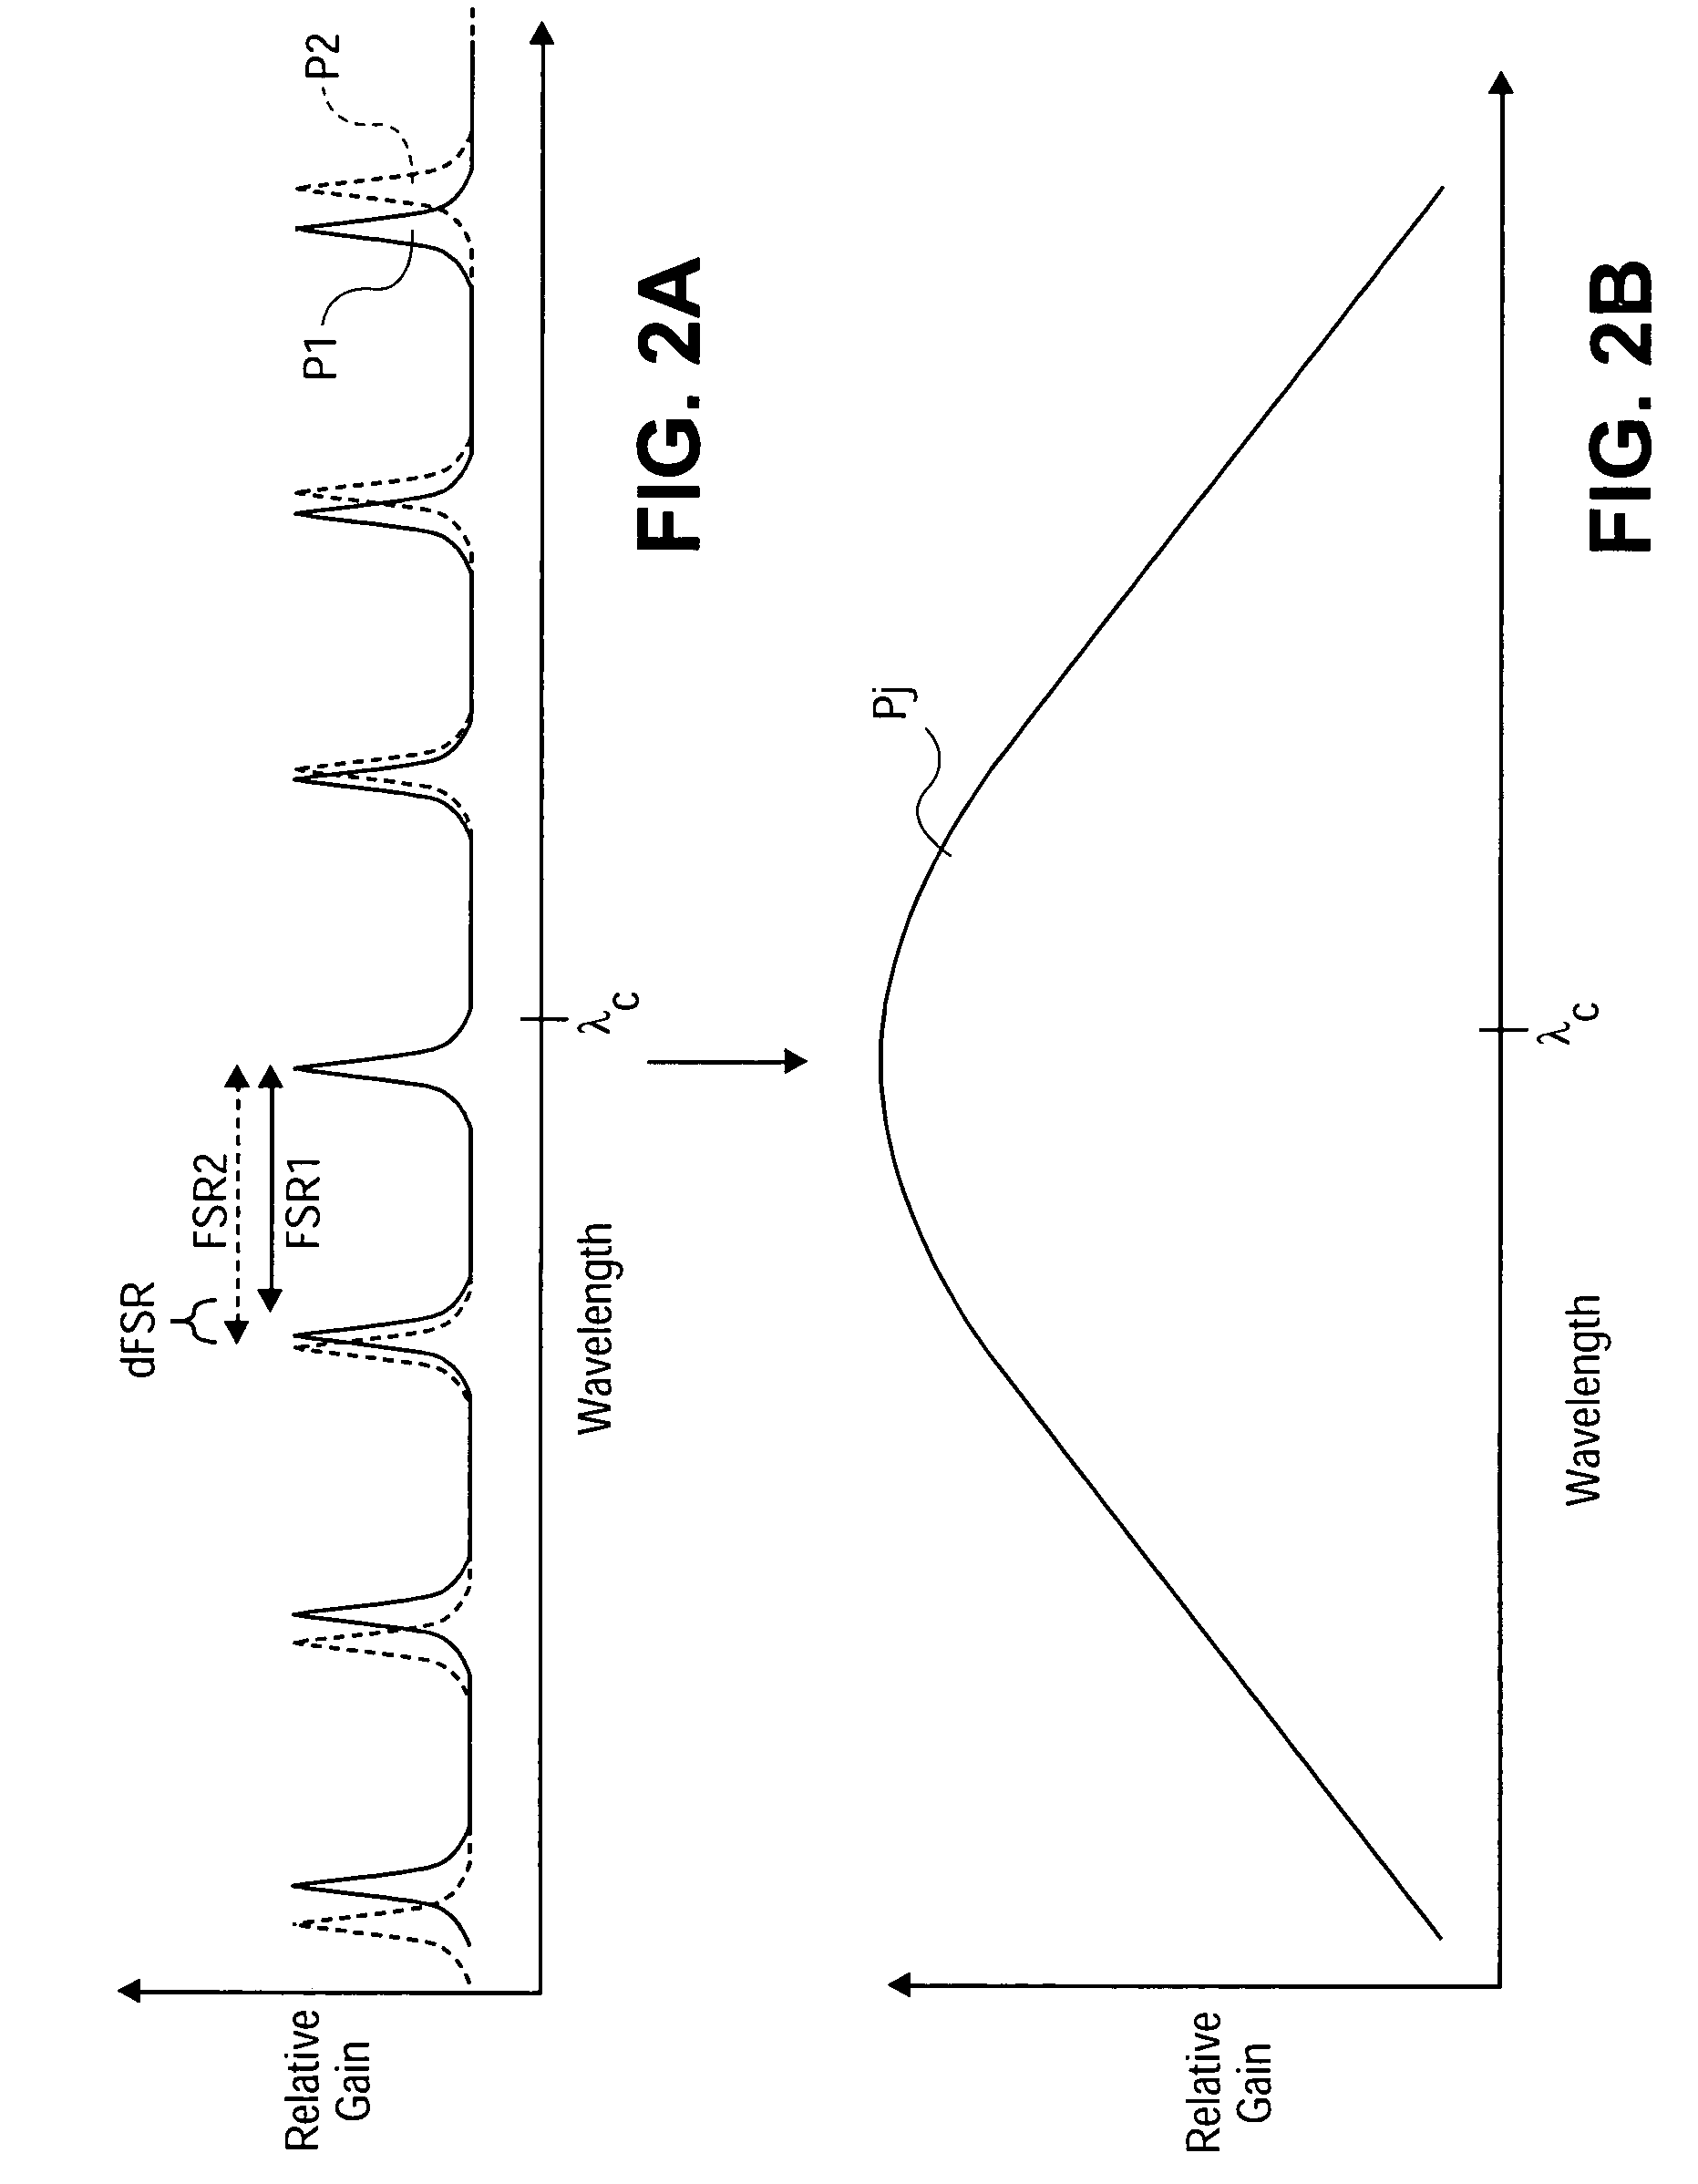 Wavelength reference apparatus and method